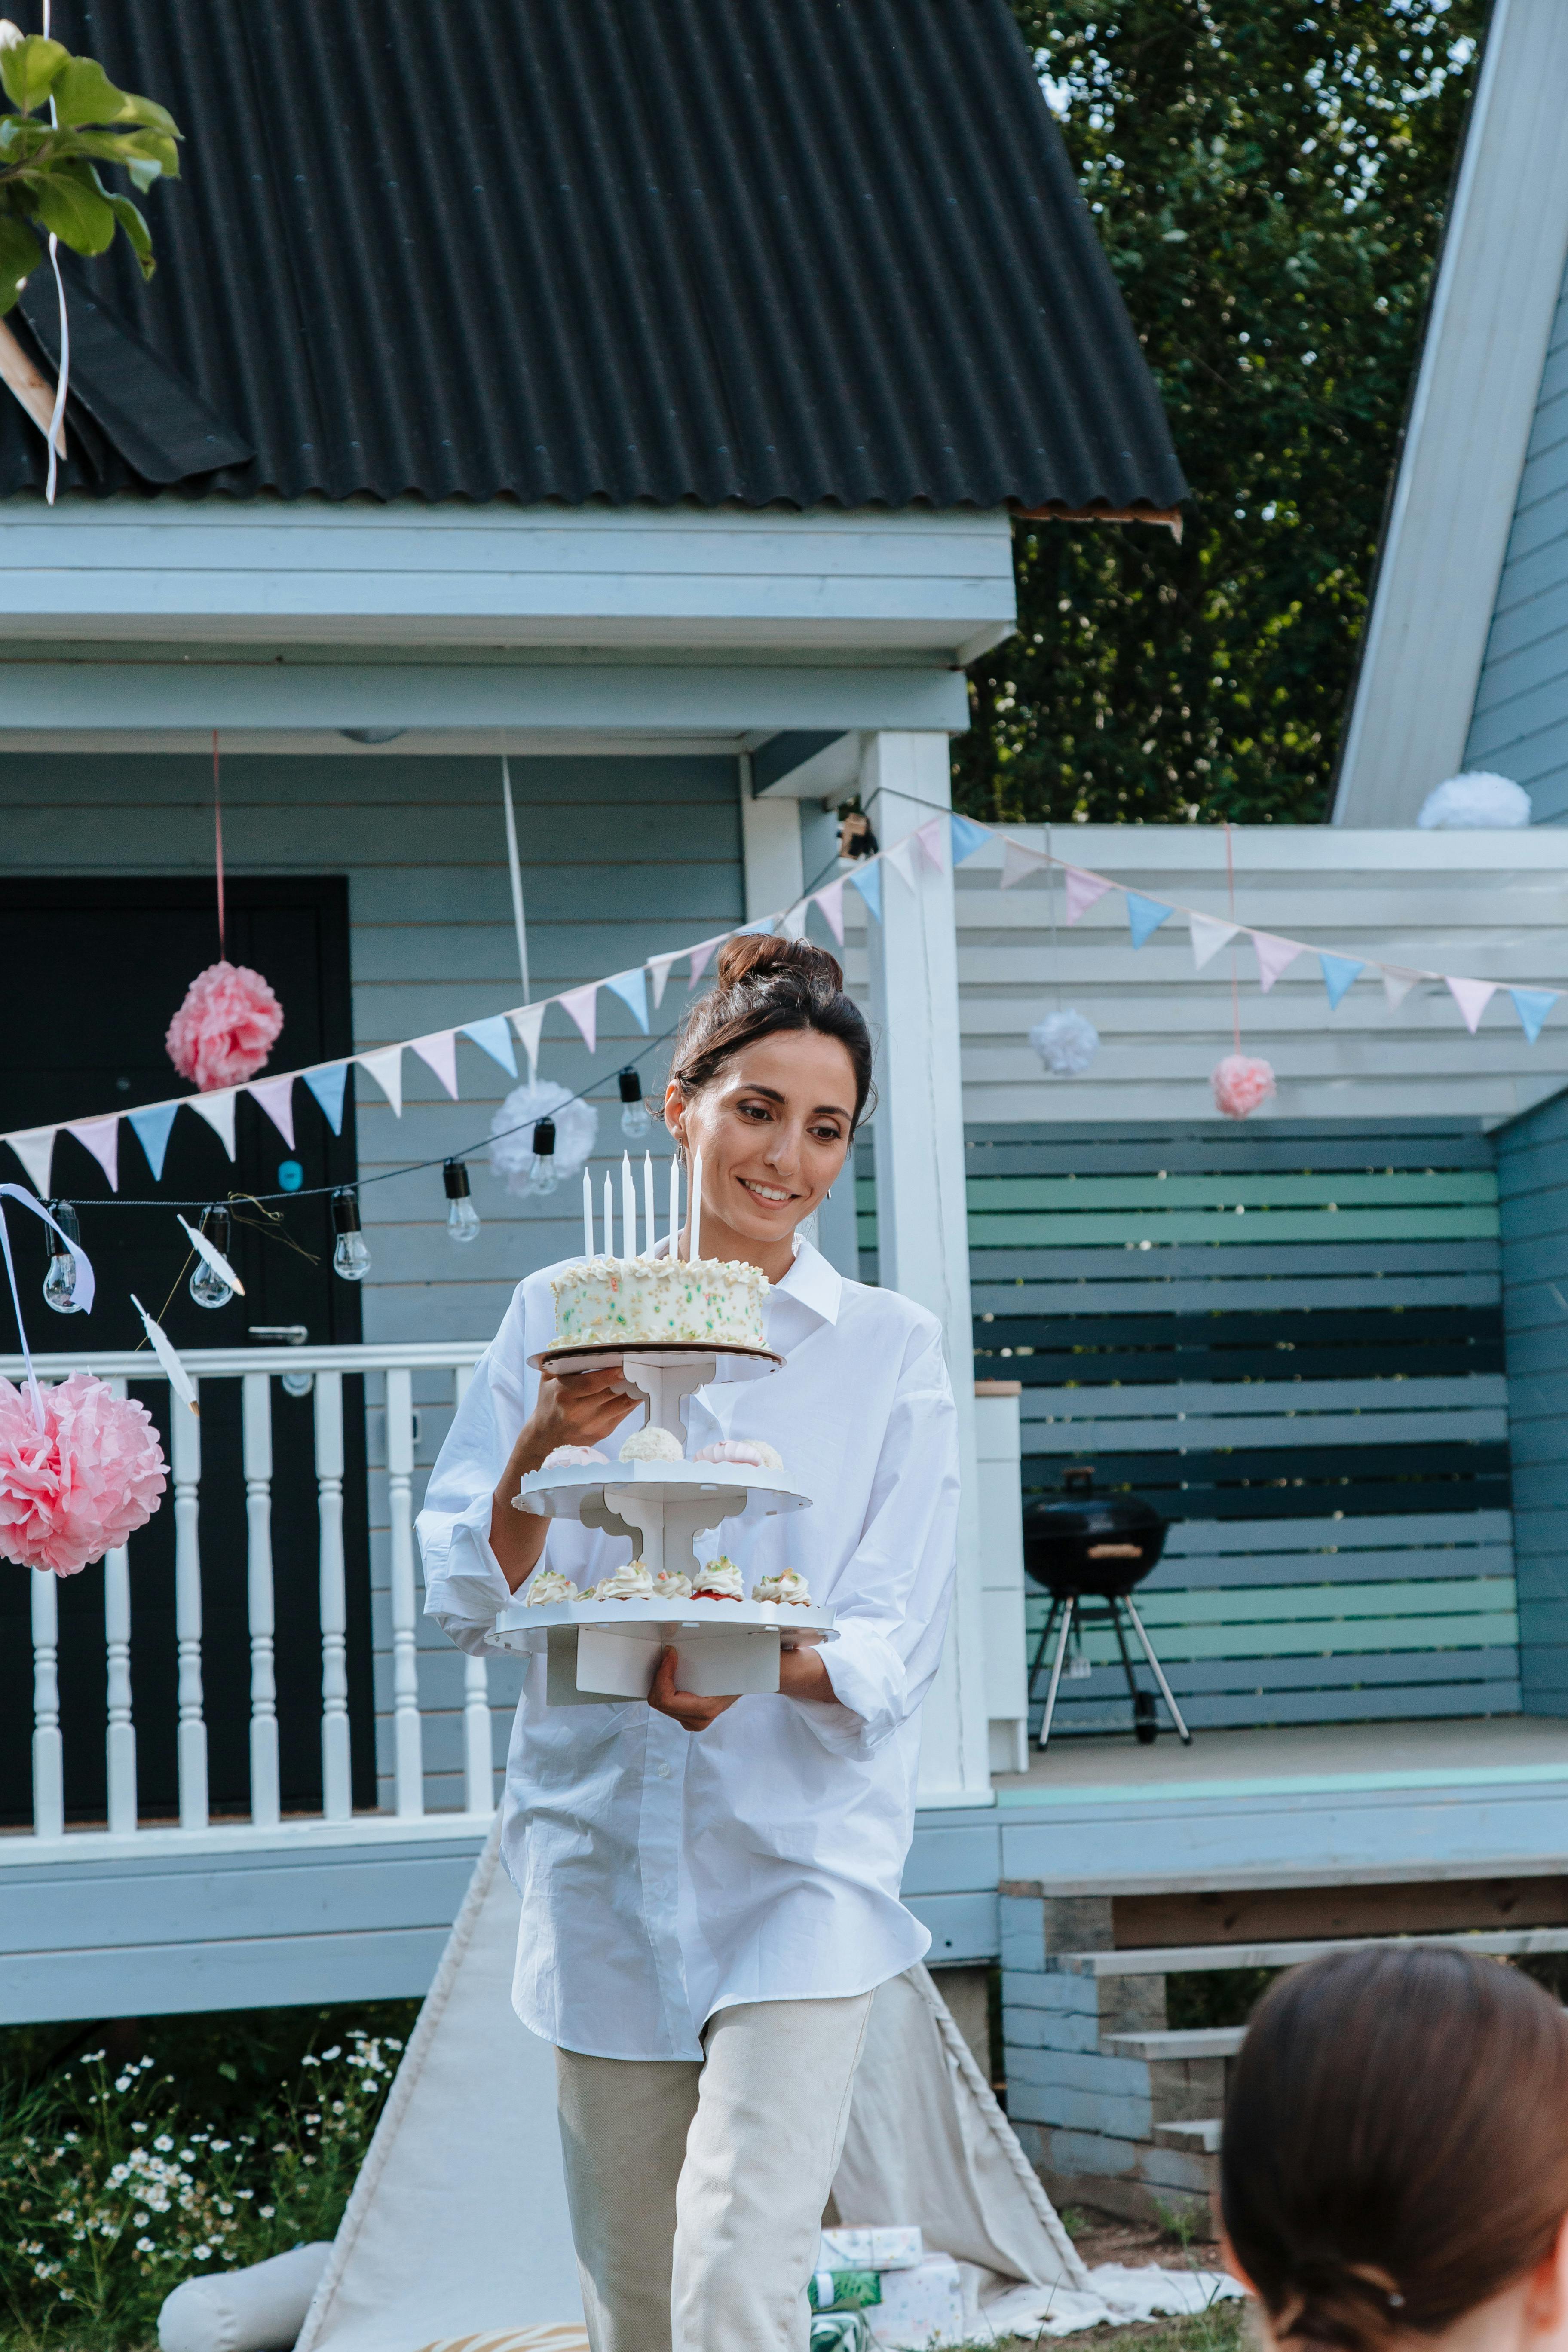 A woman carrying a birthday cake | Source: Pexels